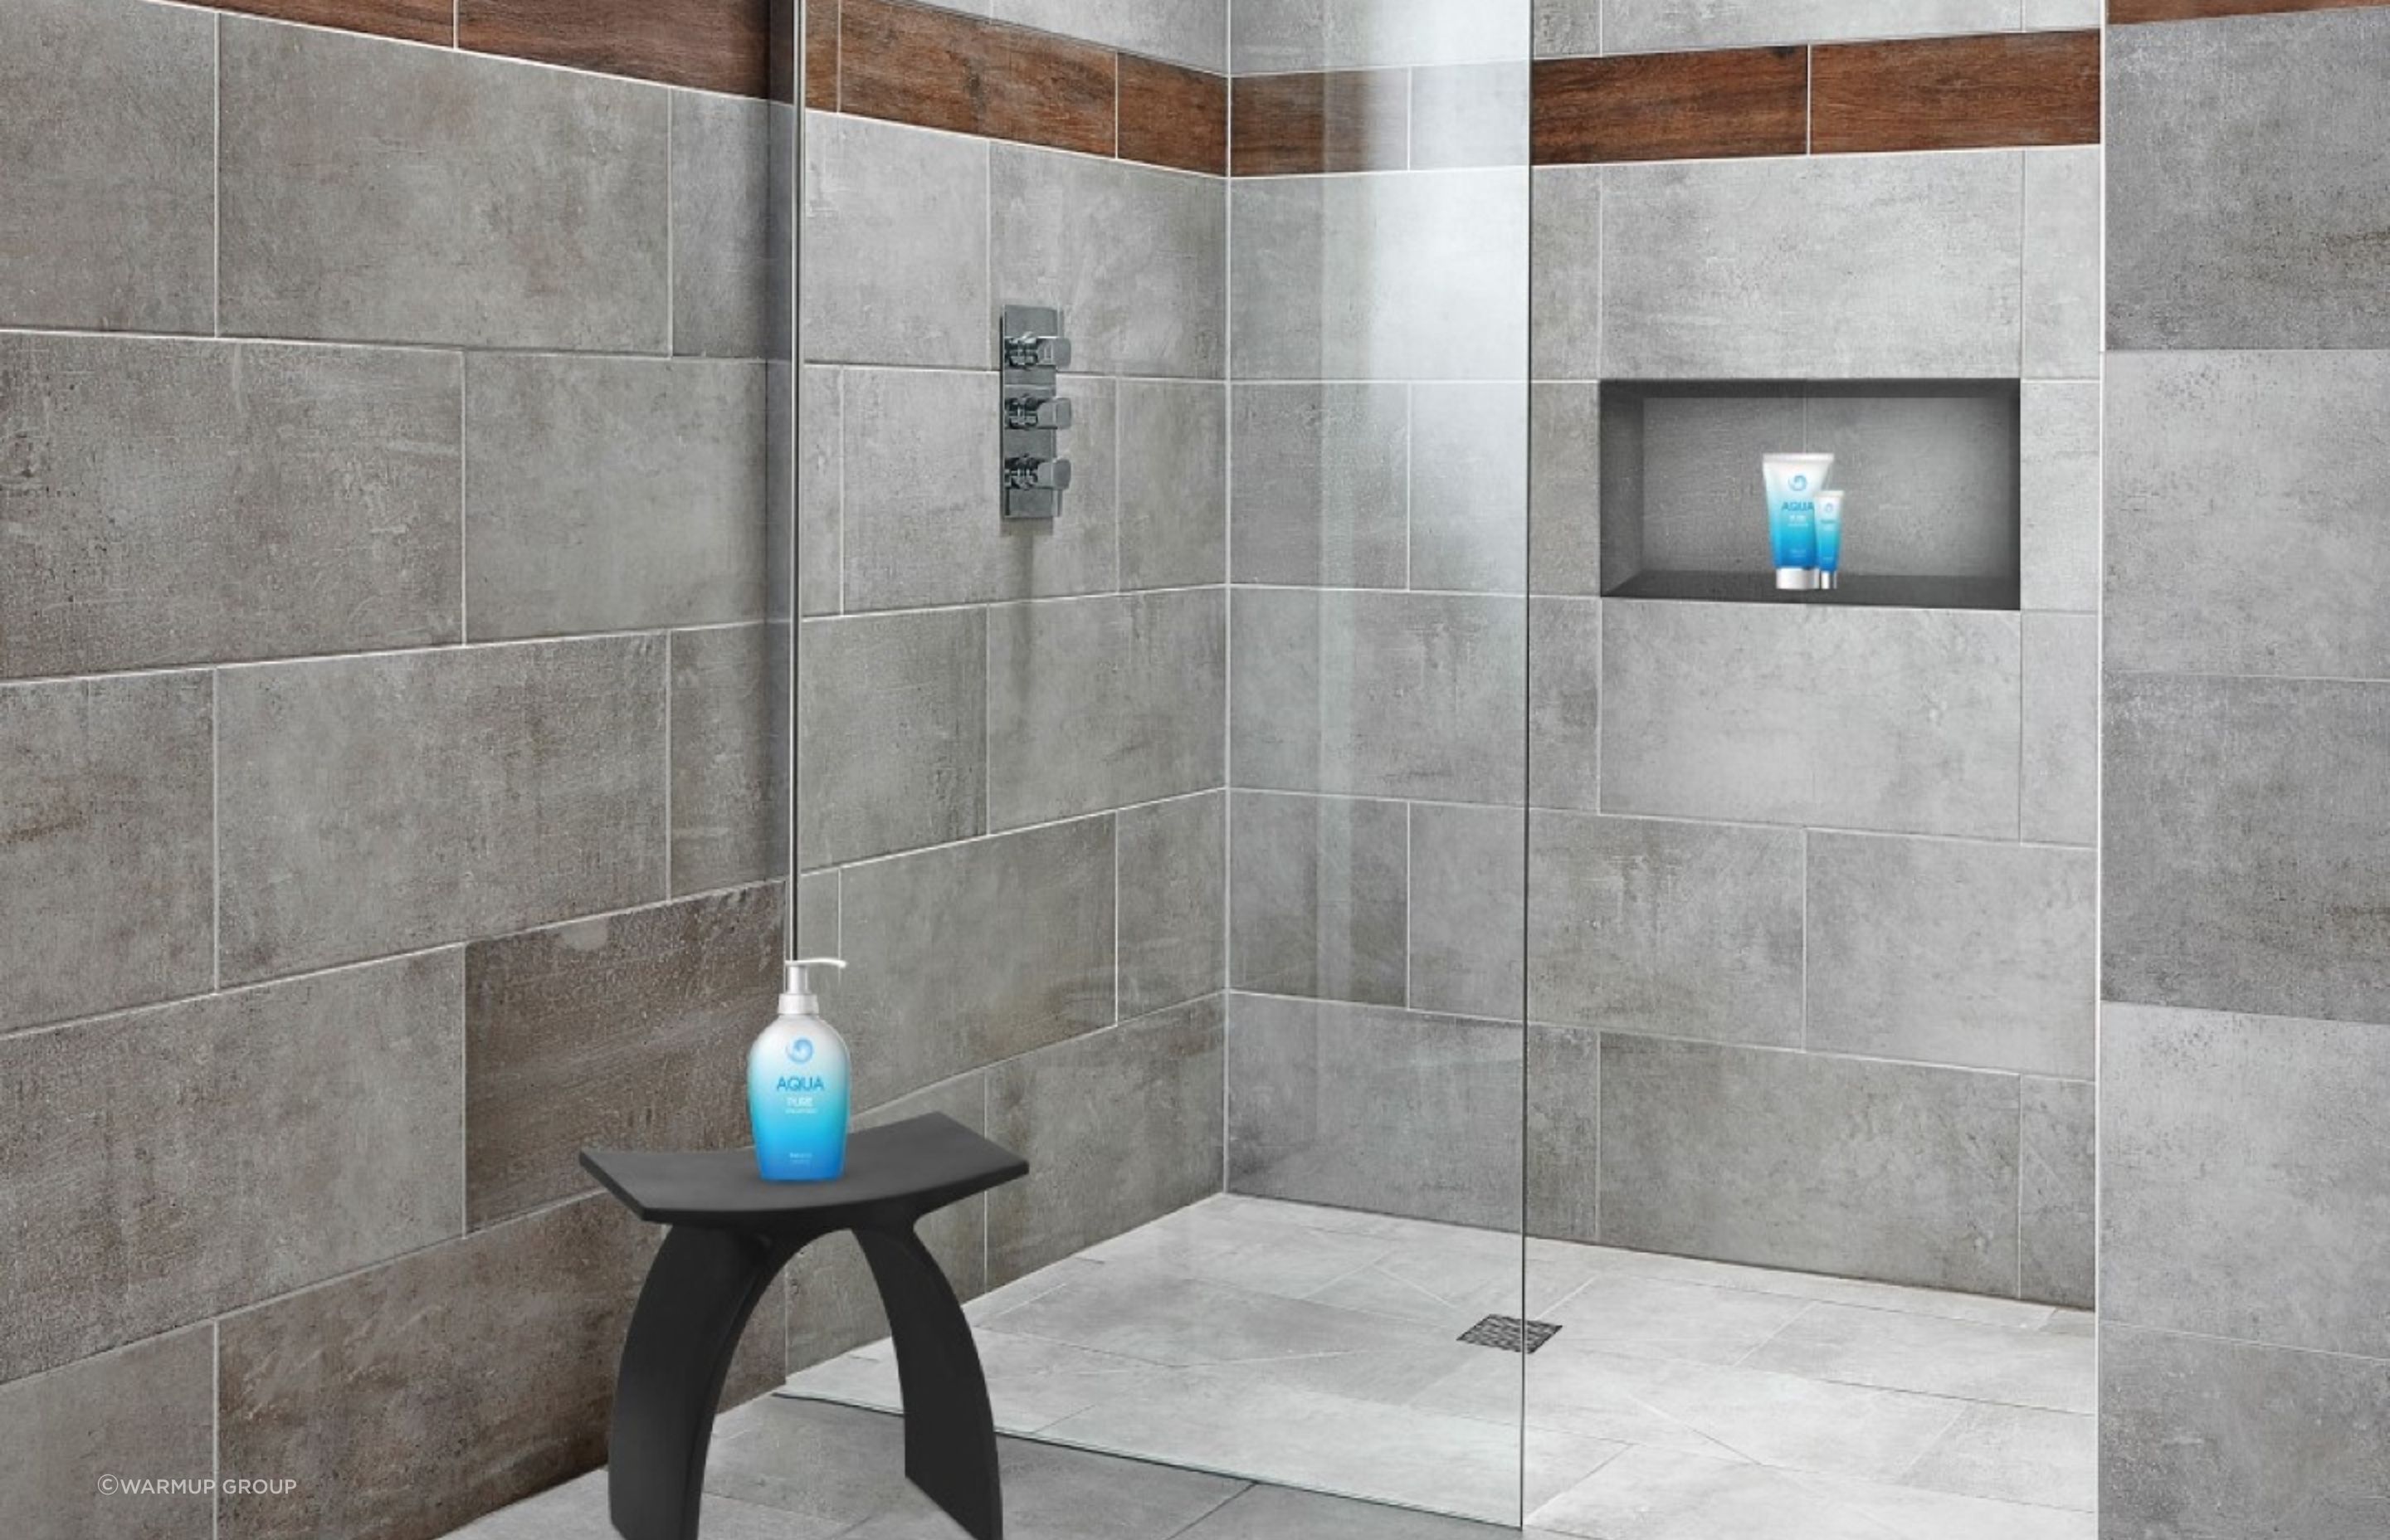 The Marmox Shower Base System facilitates a tiled flooring solution for superior comfort and aesthetics.